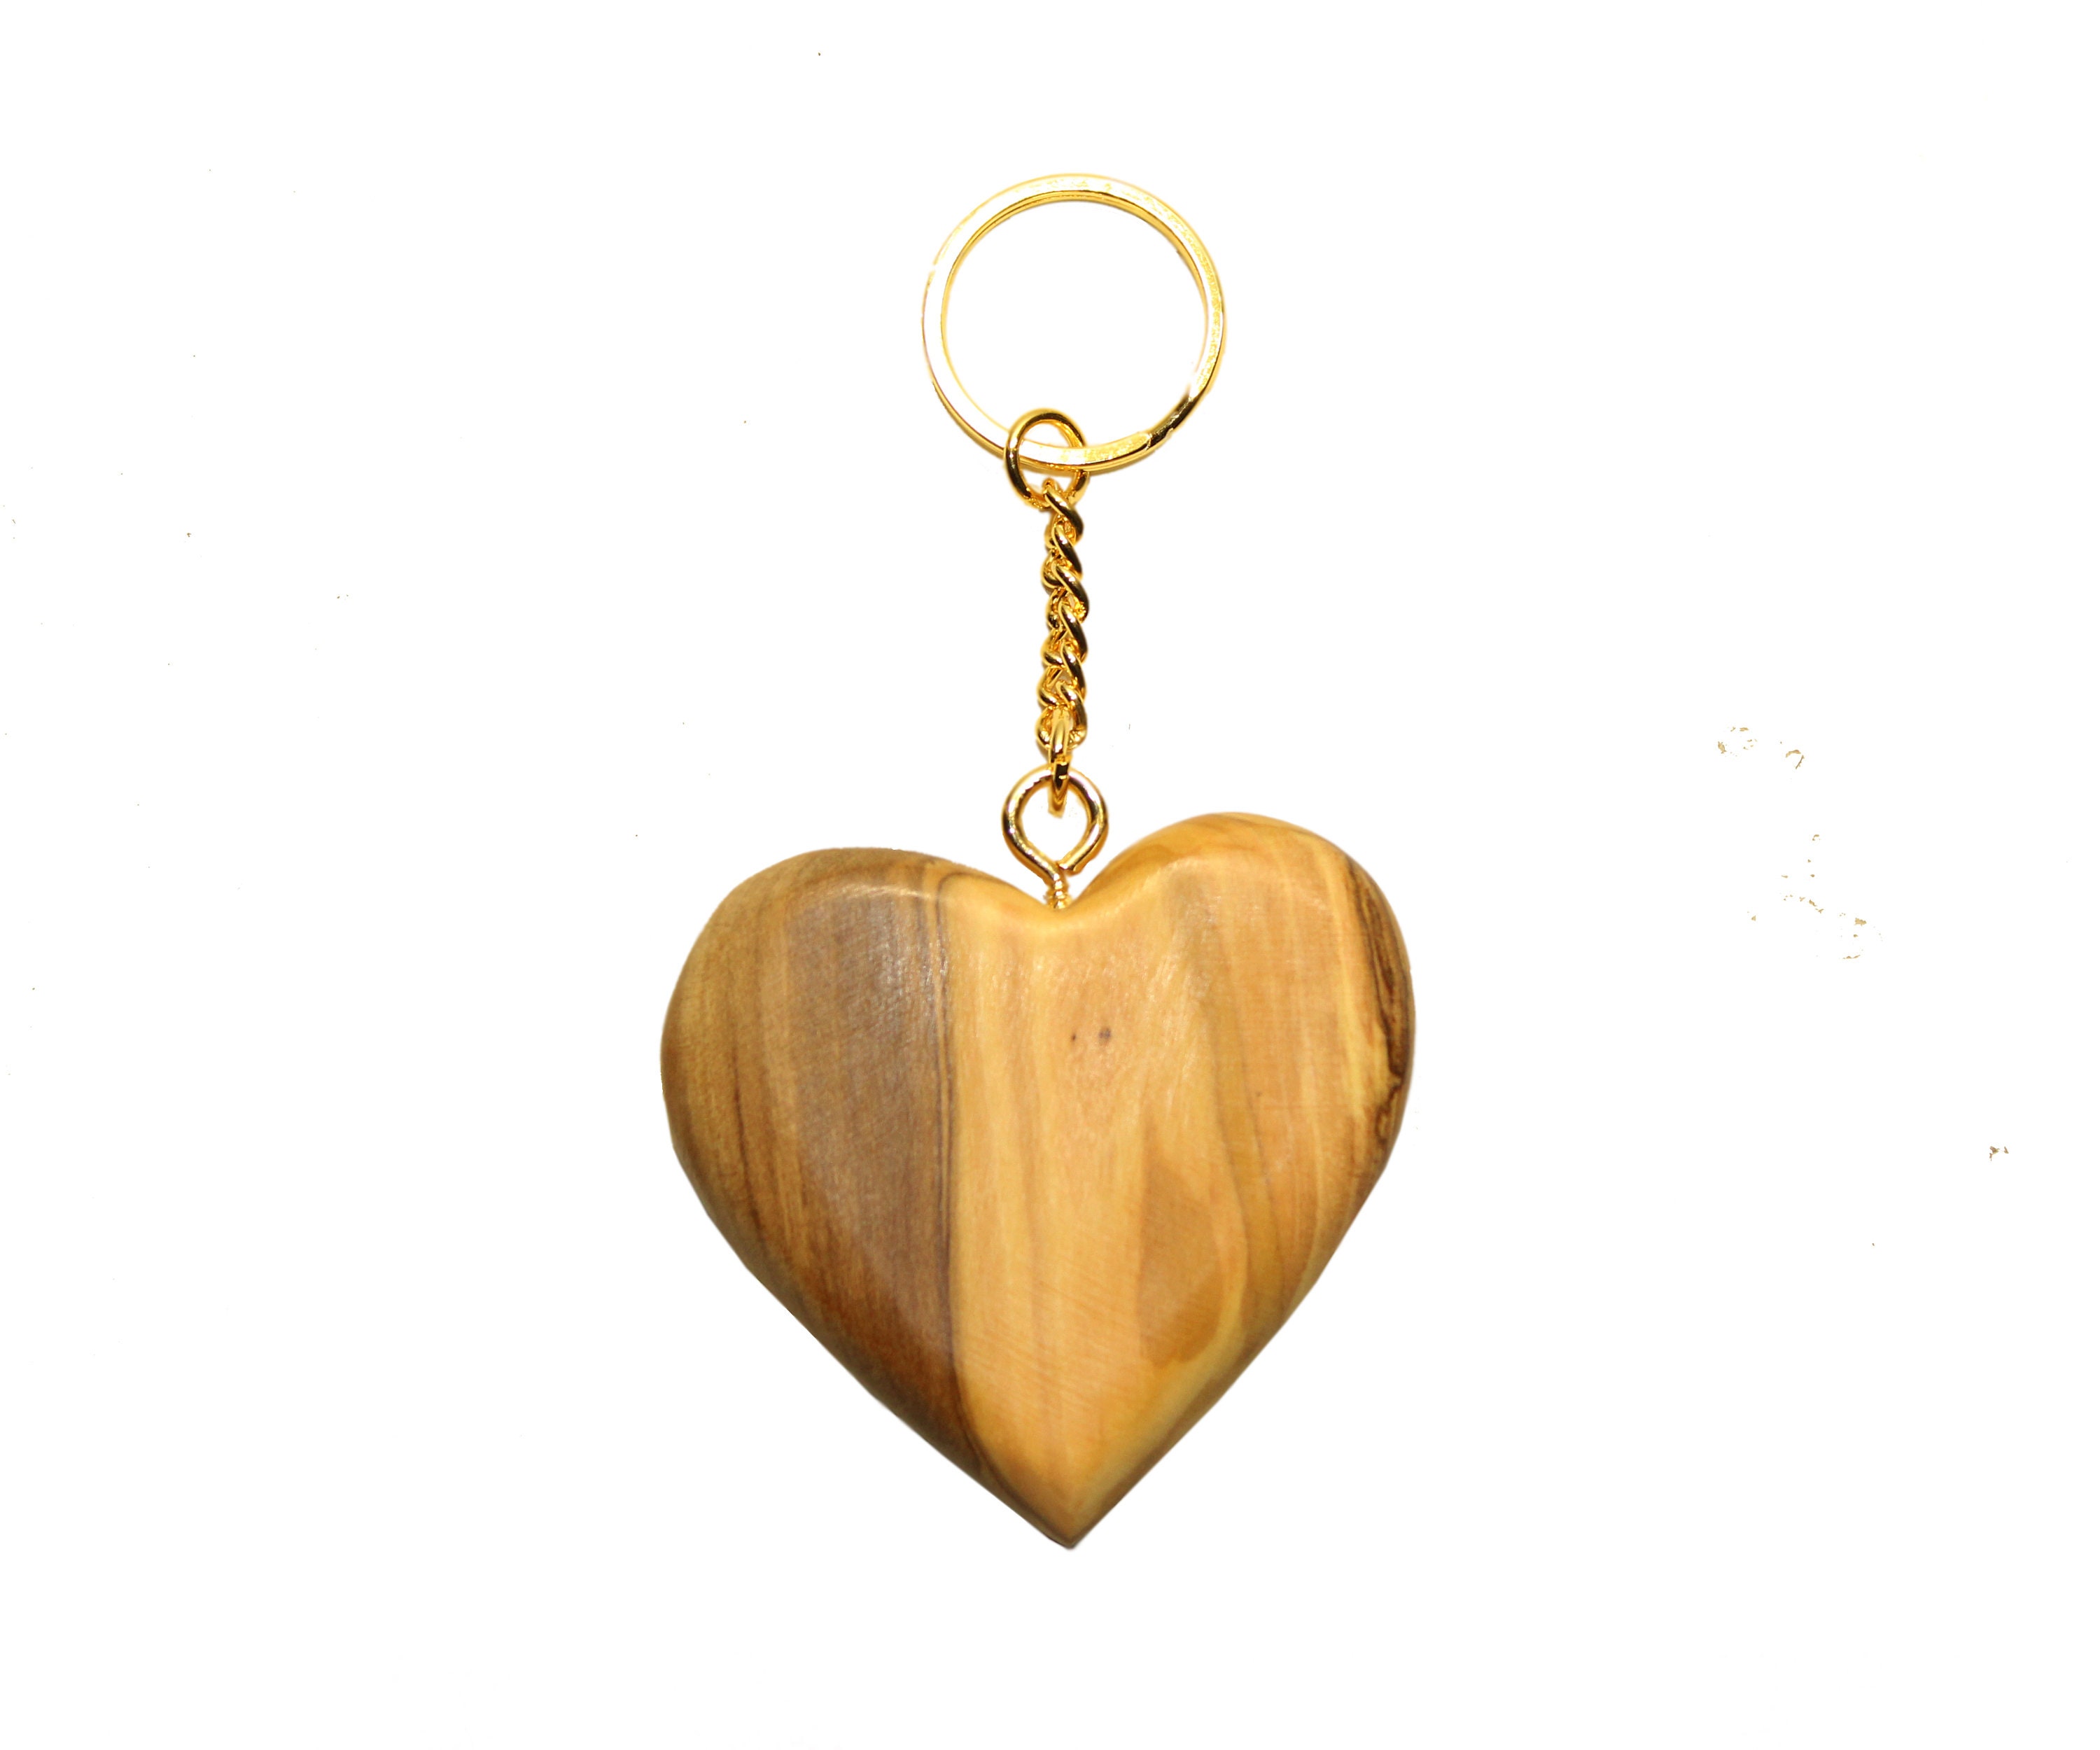 READY TO SHIP Wooden Heart Keychain Floral Print Keychain With 